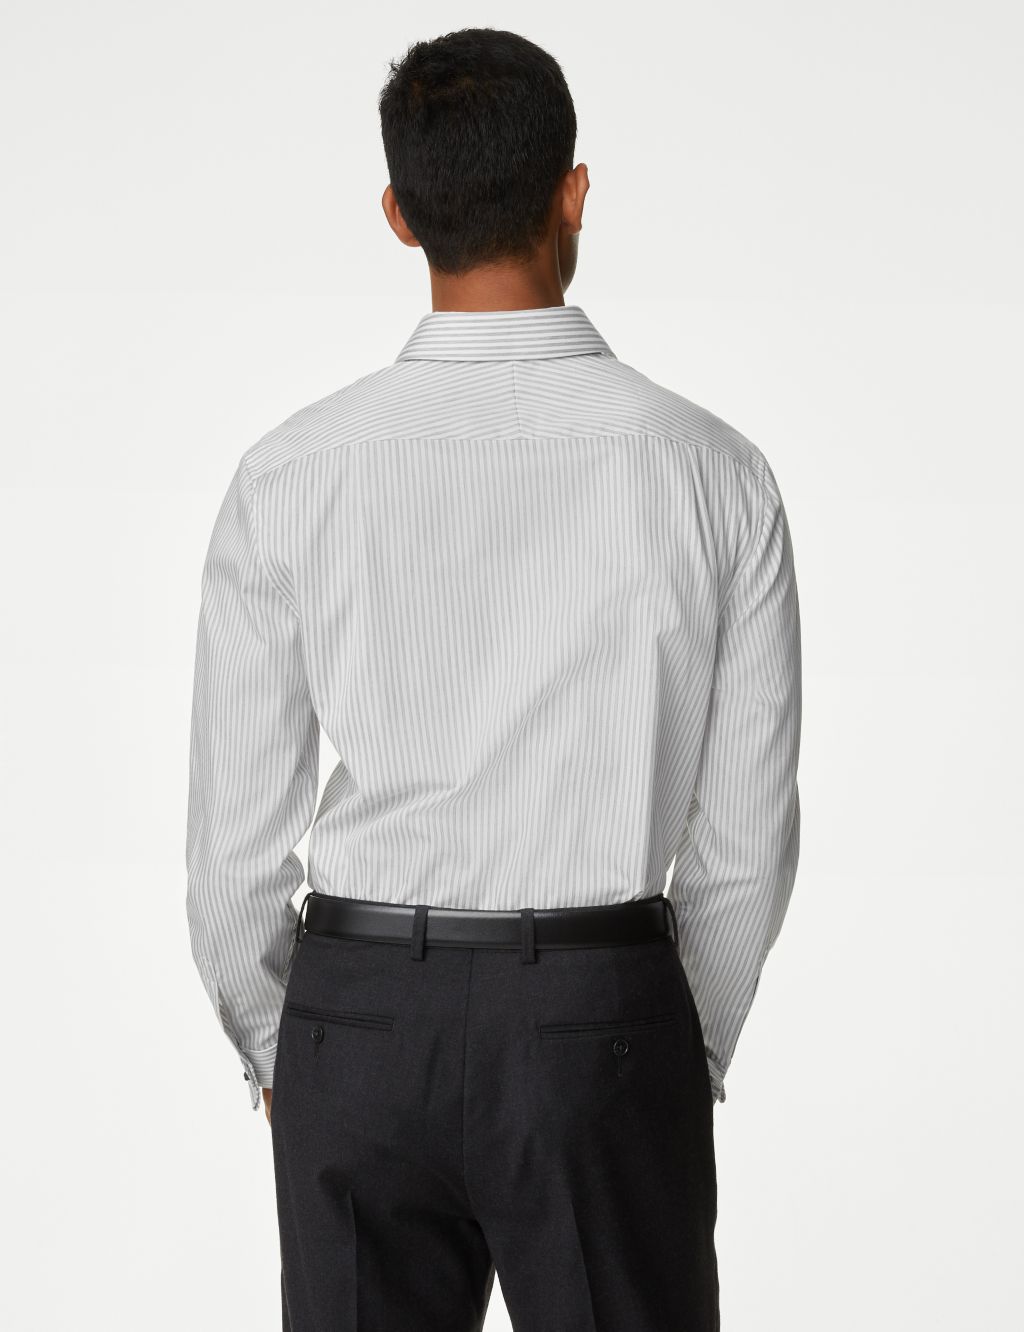 Tailored Fit Easy Iron Pure Cotton Shirt image 5